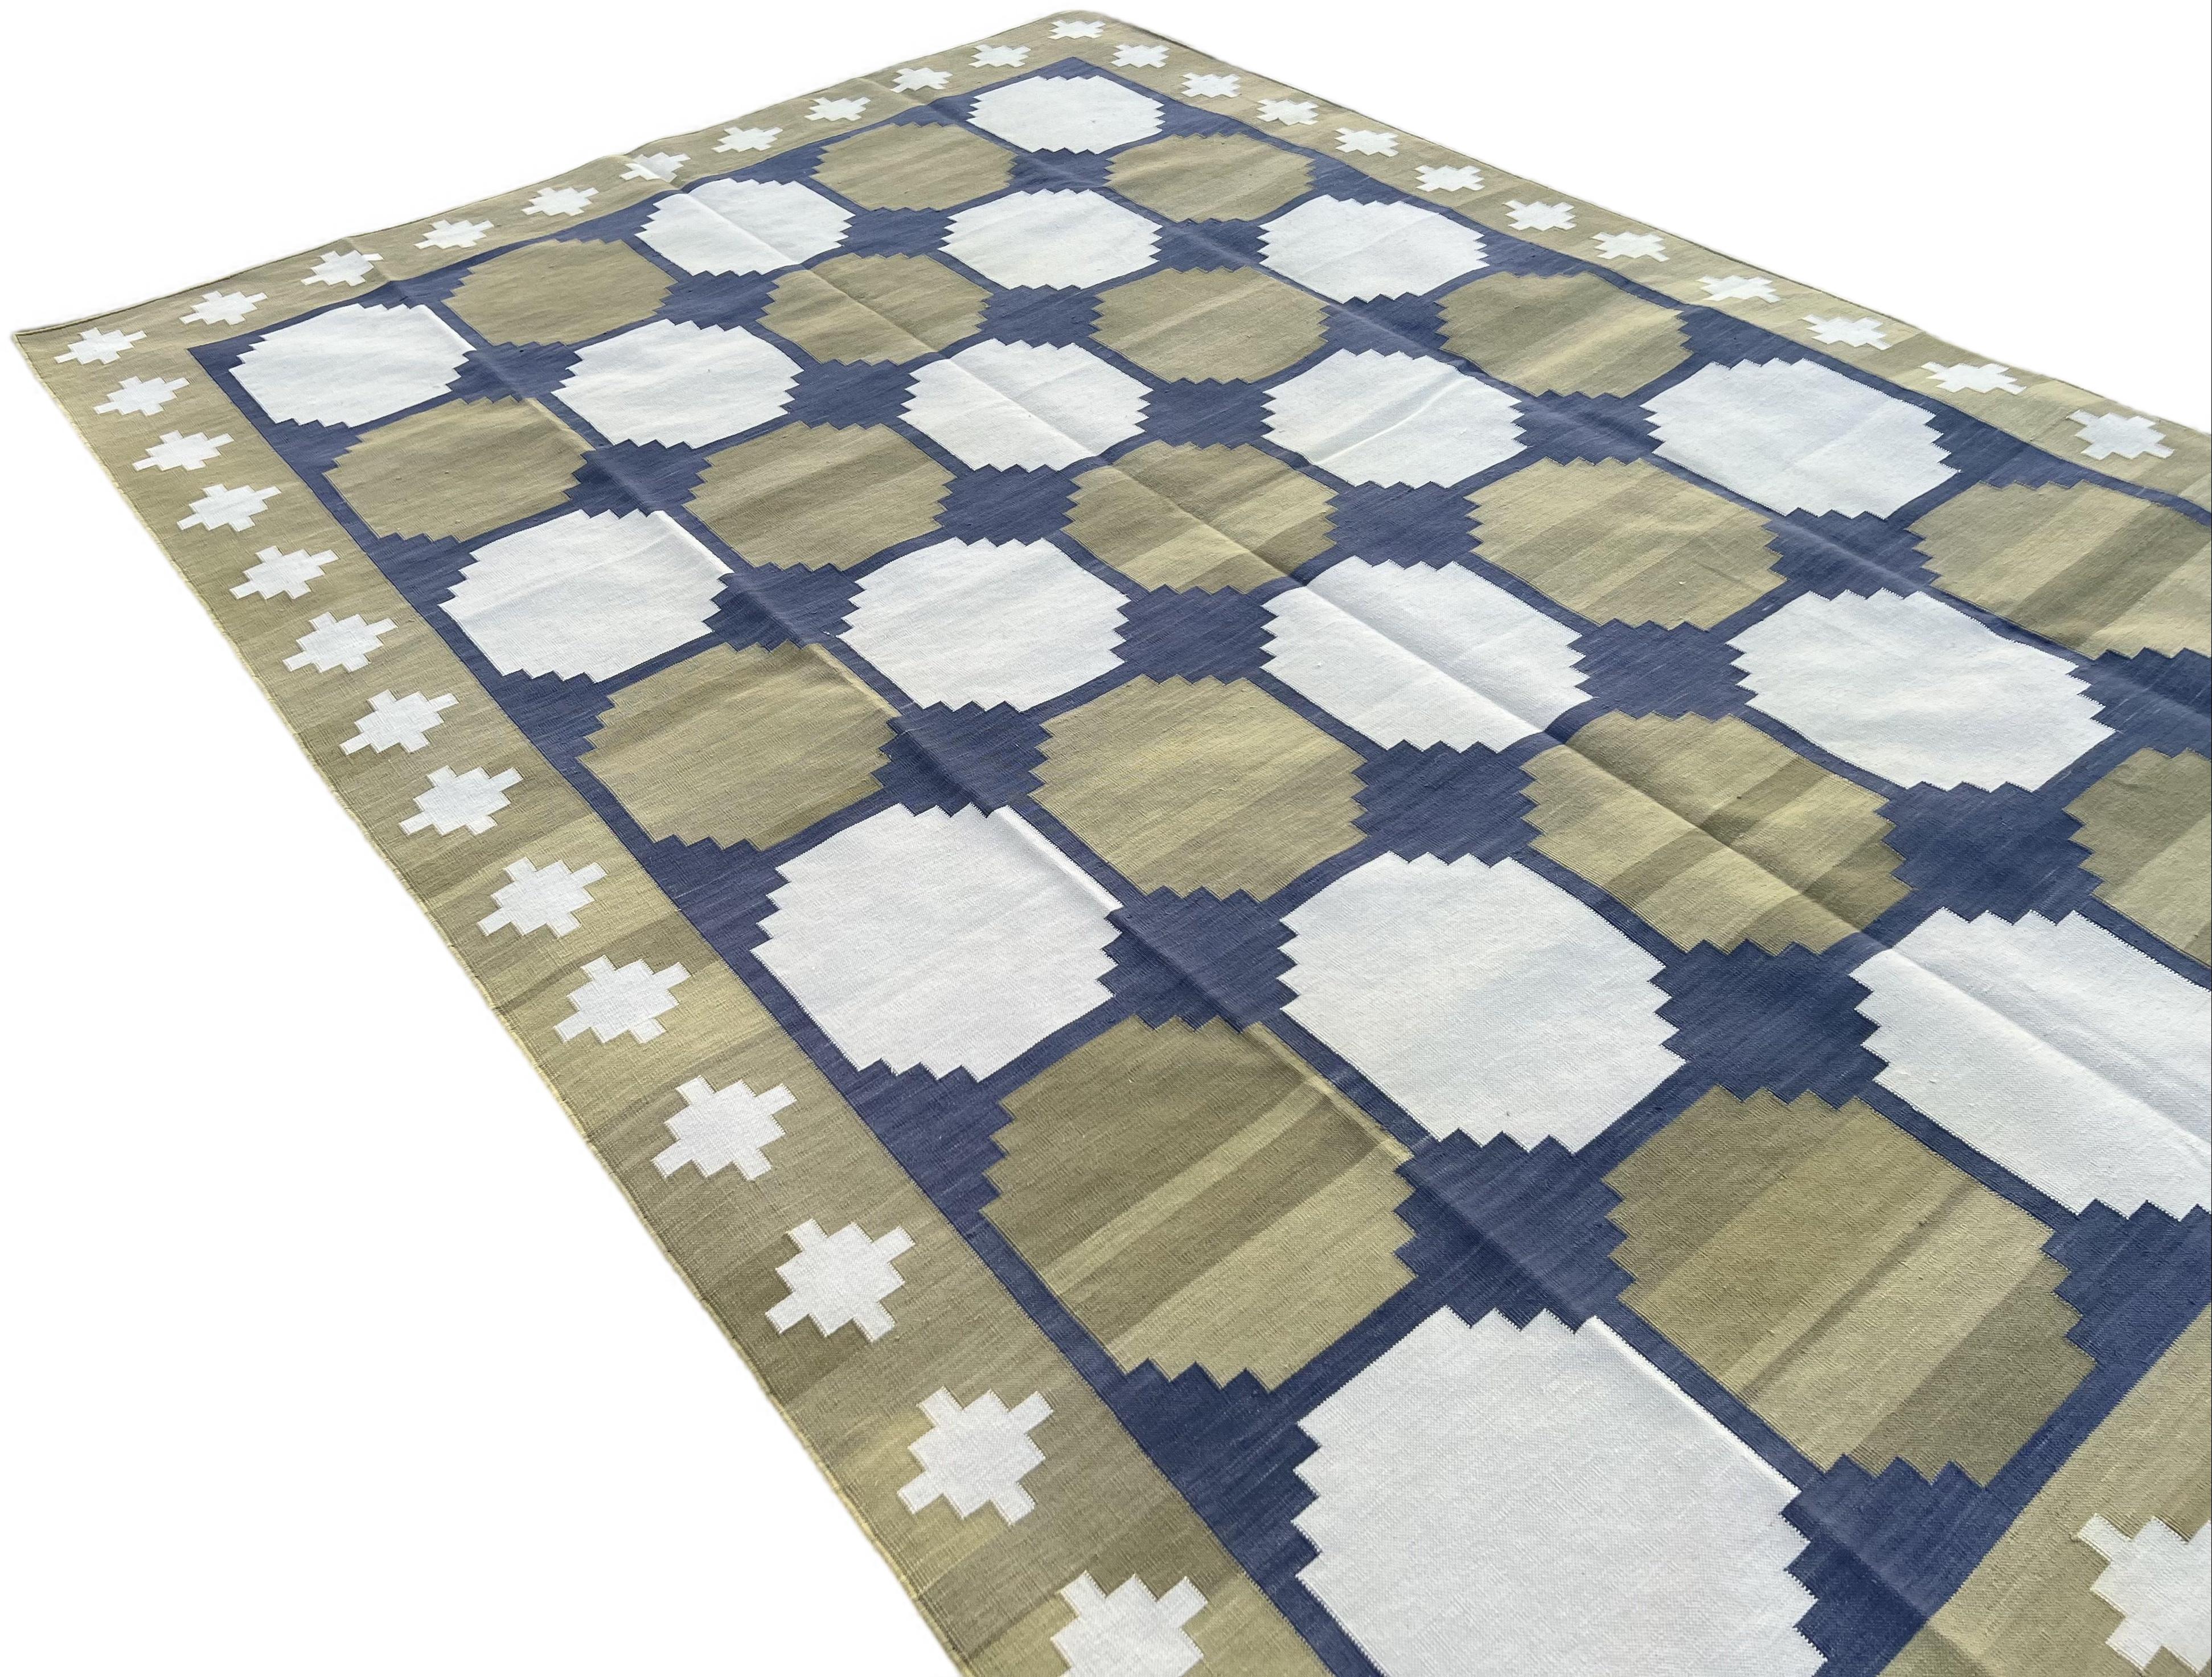 Contemporary Handmade Cotton Area Flat Weave Rug, 6x9 Green And Blue Geometric Indian Dhurrie For Sale